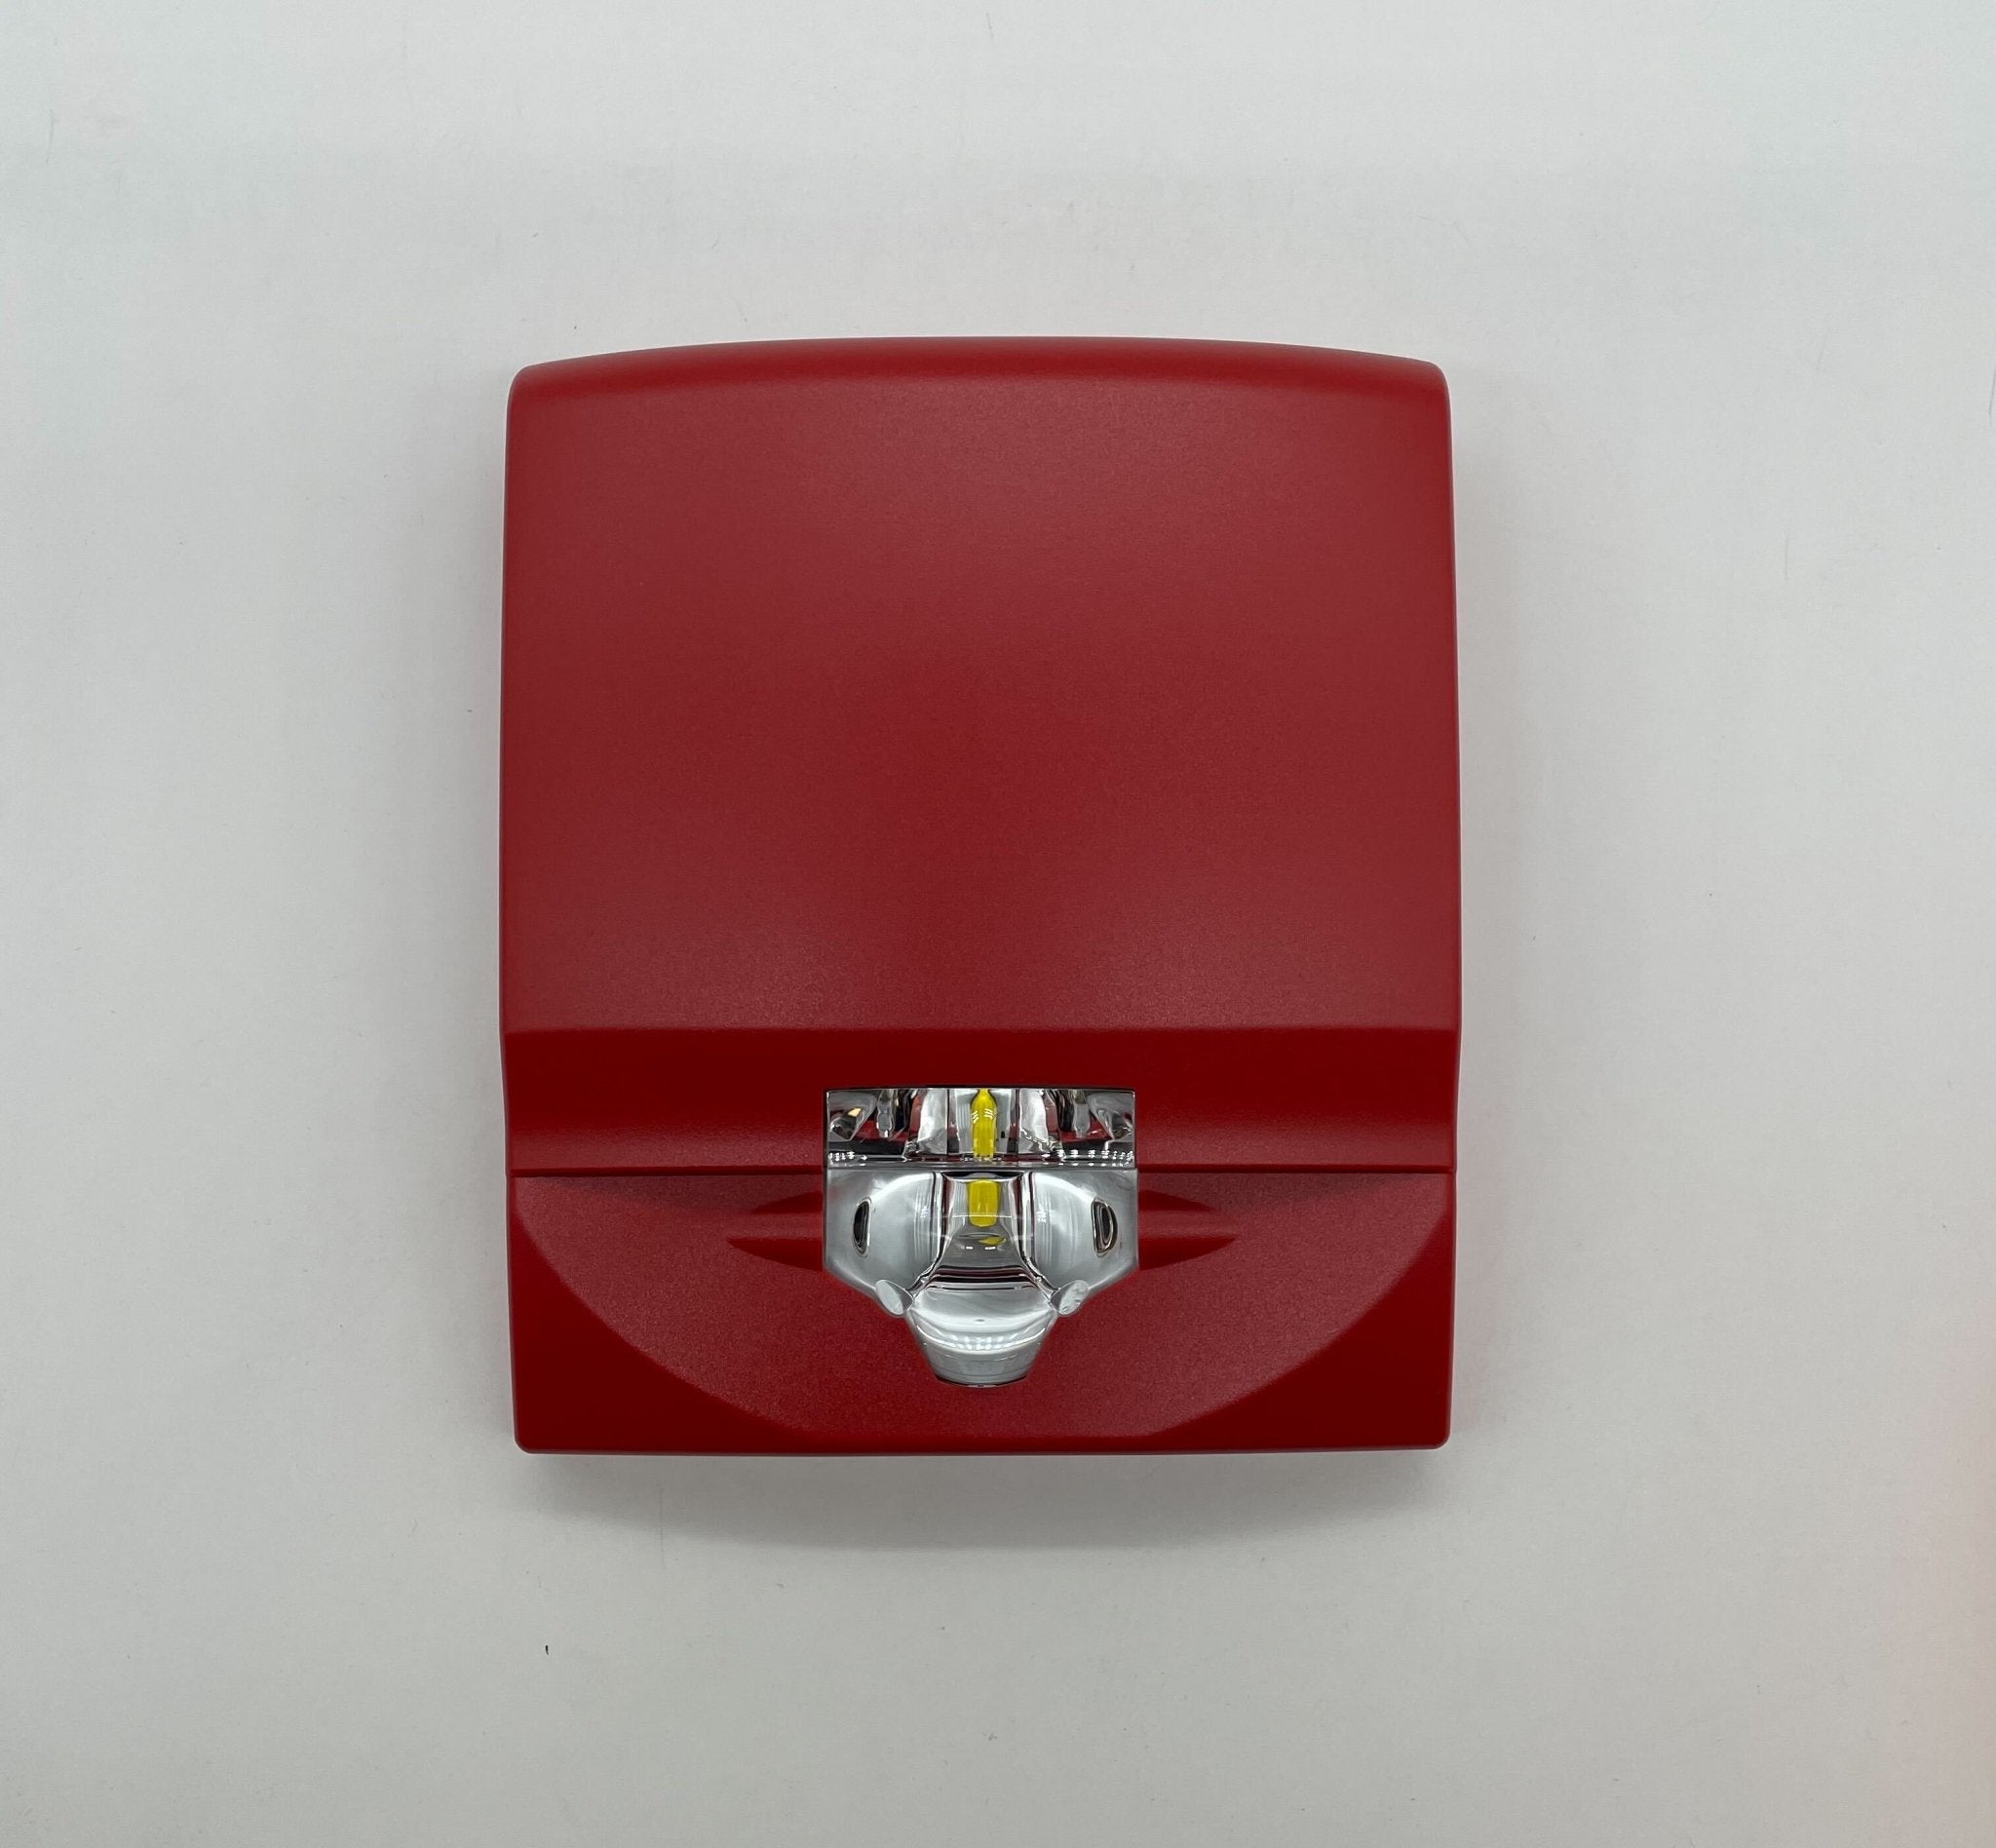 Edwards G4VRF - The Fire Alarm Supplier